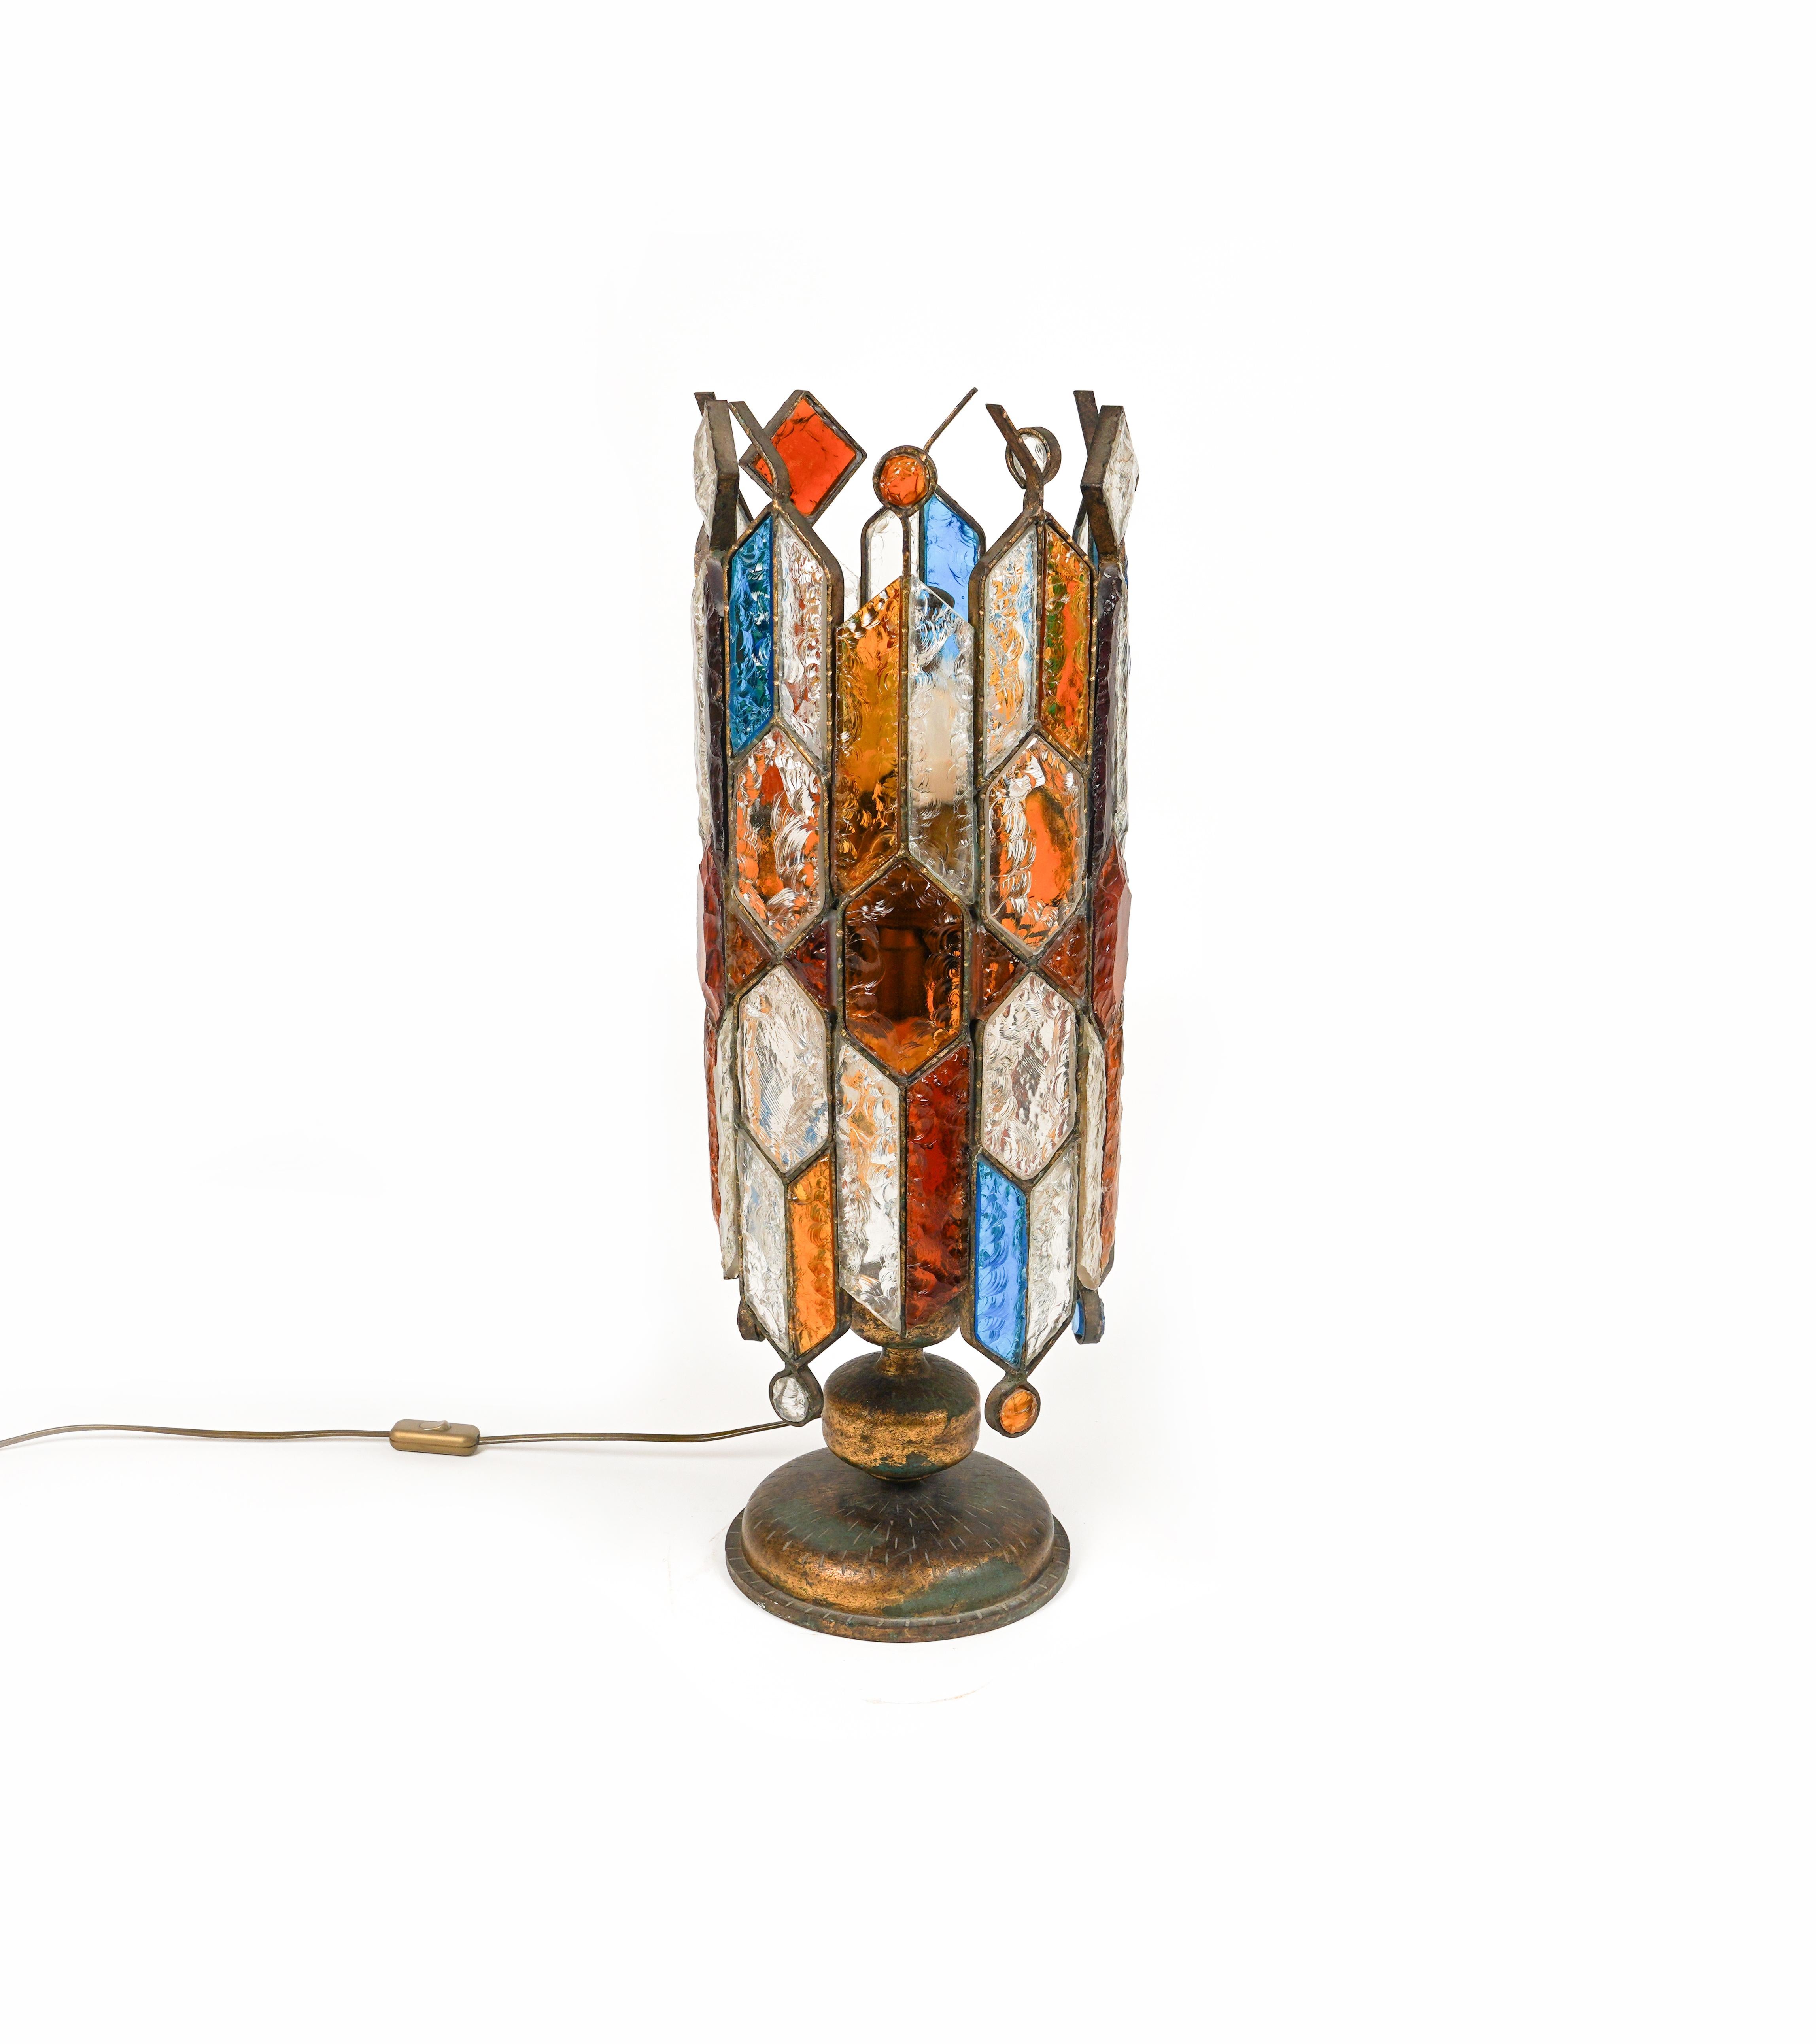 Amazing big Midcentury table lamp or floor lamp in golden wrought iron and multi-color hammered glass produced by Longobard the concurrent of Poliarte at the 1960s / 1970s.   

Made in Italy in the 1970s.  

It uses 10 bulbs.

The color of the